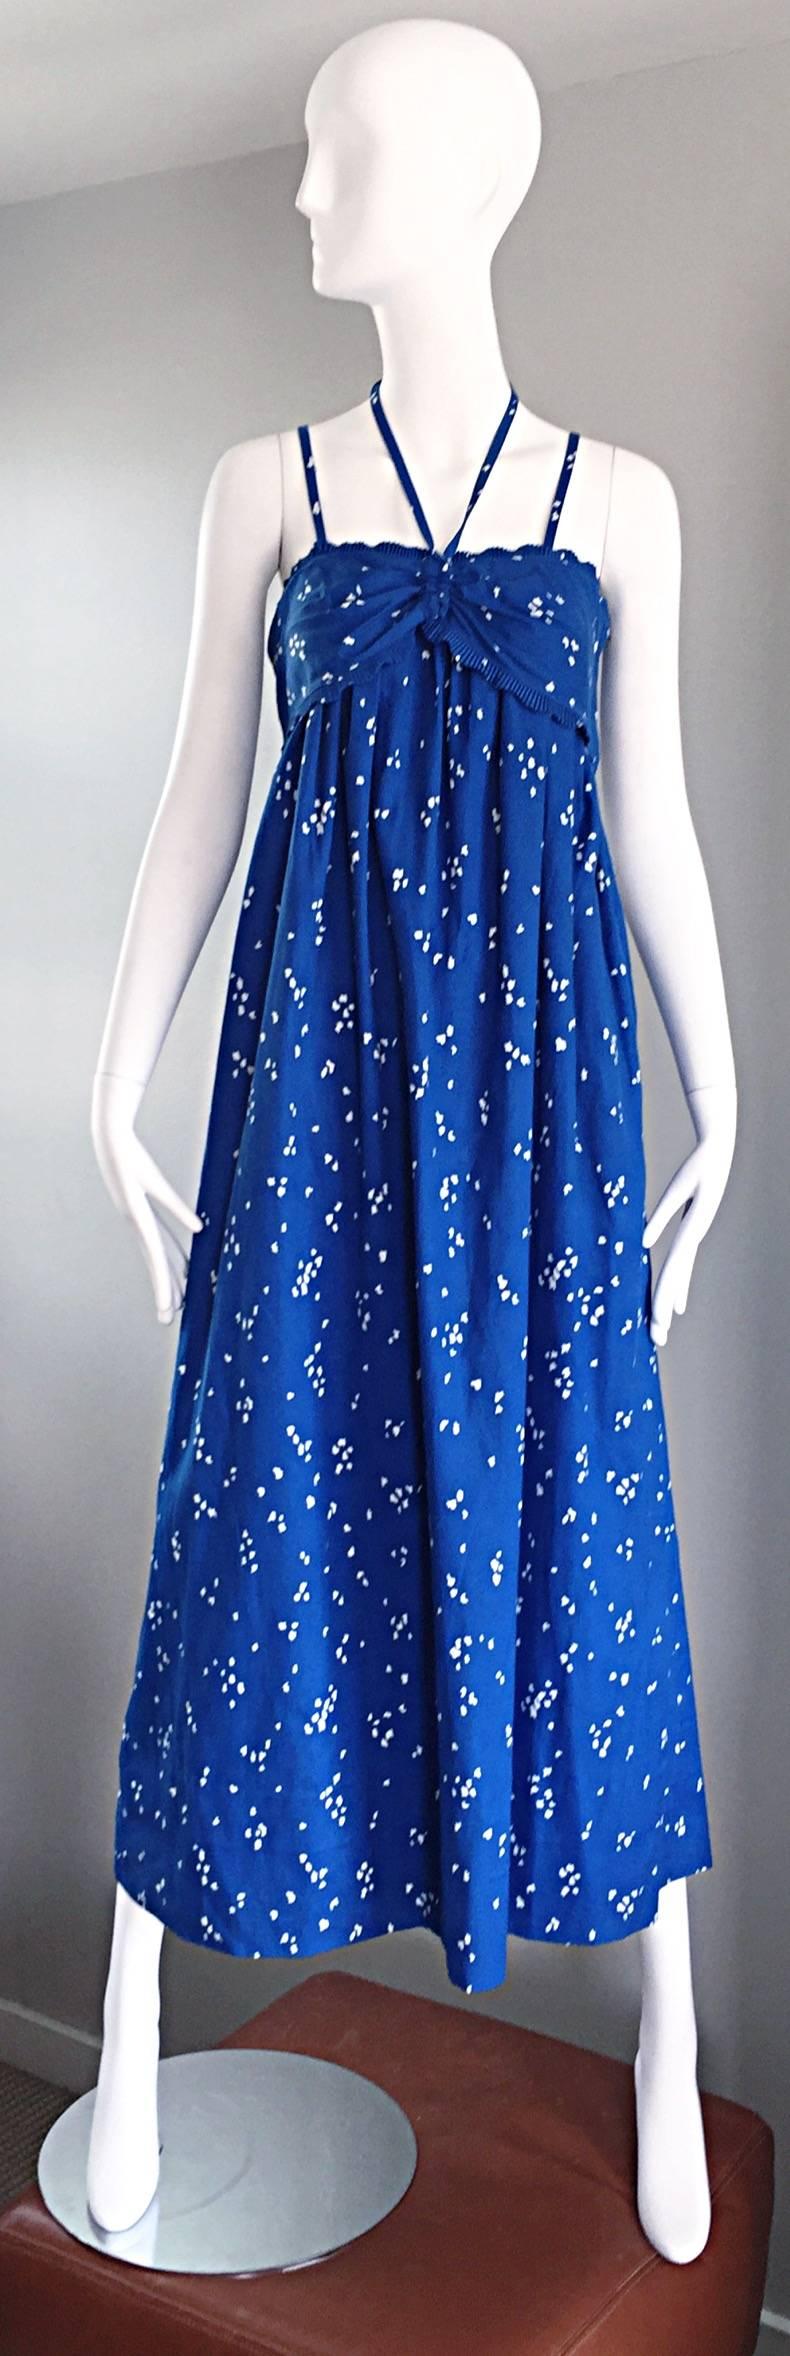 Beautiful vintage 1970s BILL TICE for I. MAGNIN royal blue and white hand painted cotton maxi dress! Features an allover hand painted white 'splatter' print throughout. Two spaghetti straps at each shoulder, and an adjustable halter strap that ties